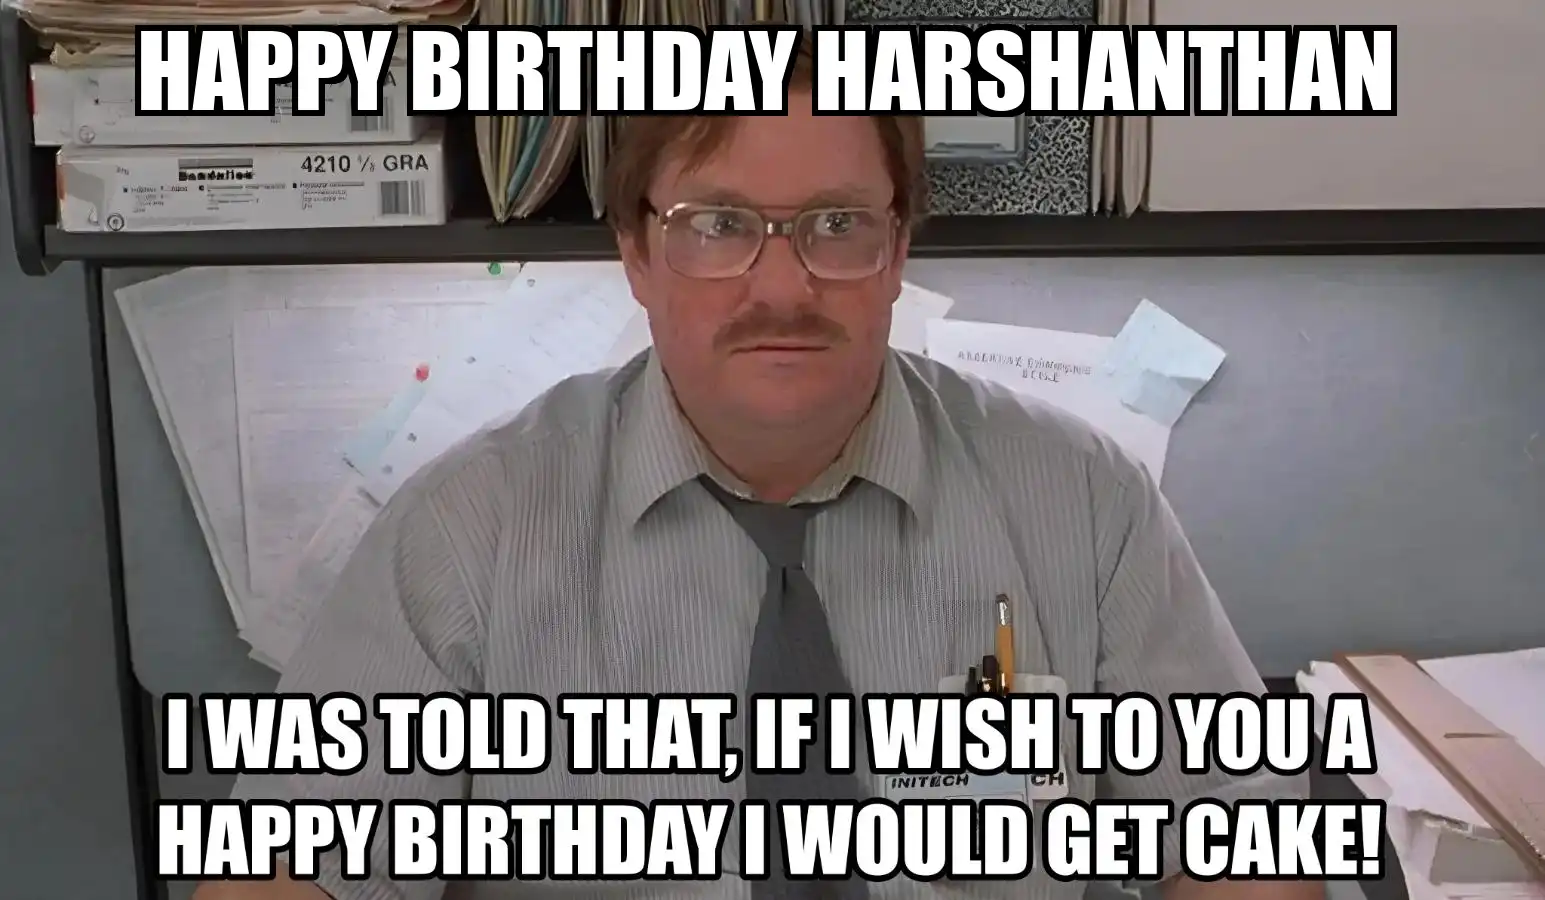 Happy Birthday Harshanthan I Would Get A Cake Meme